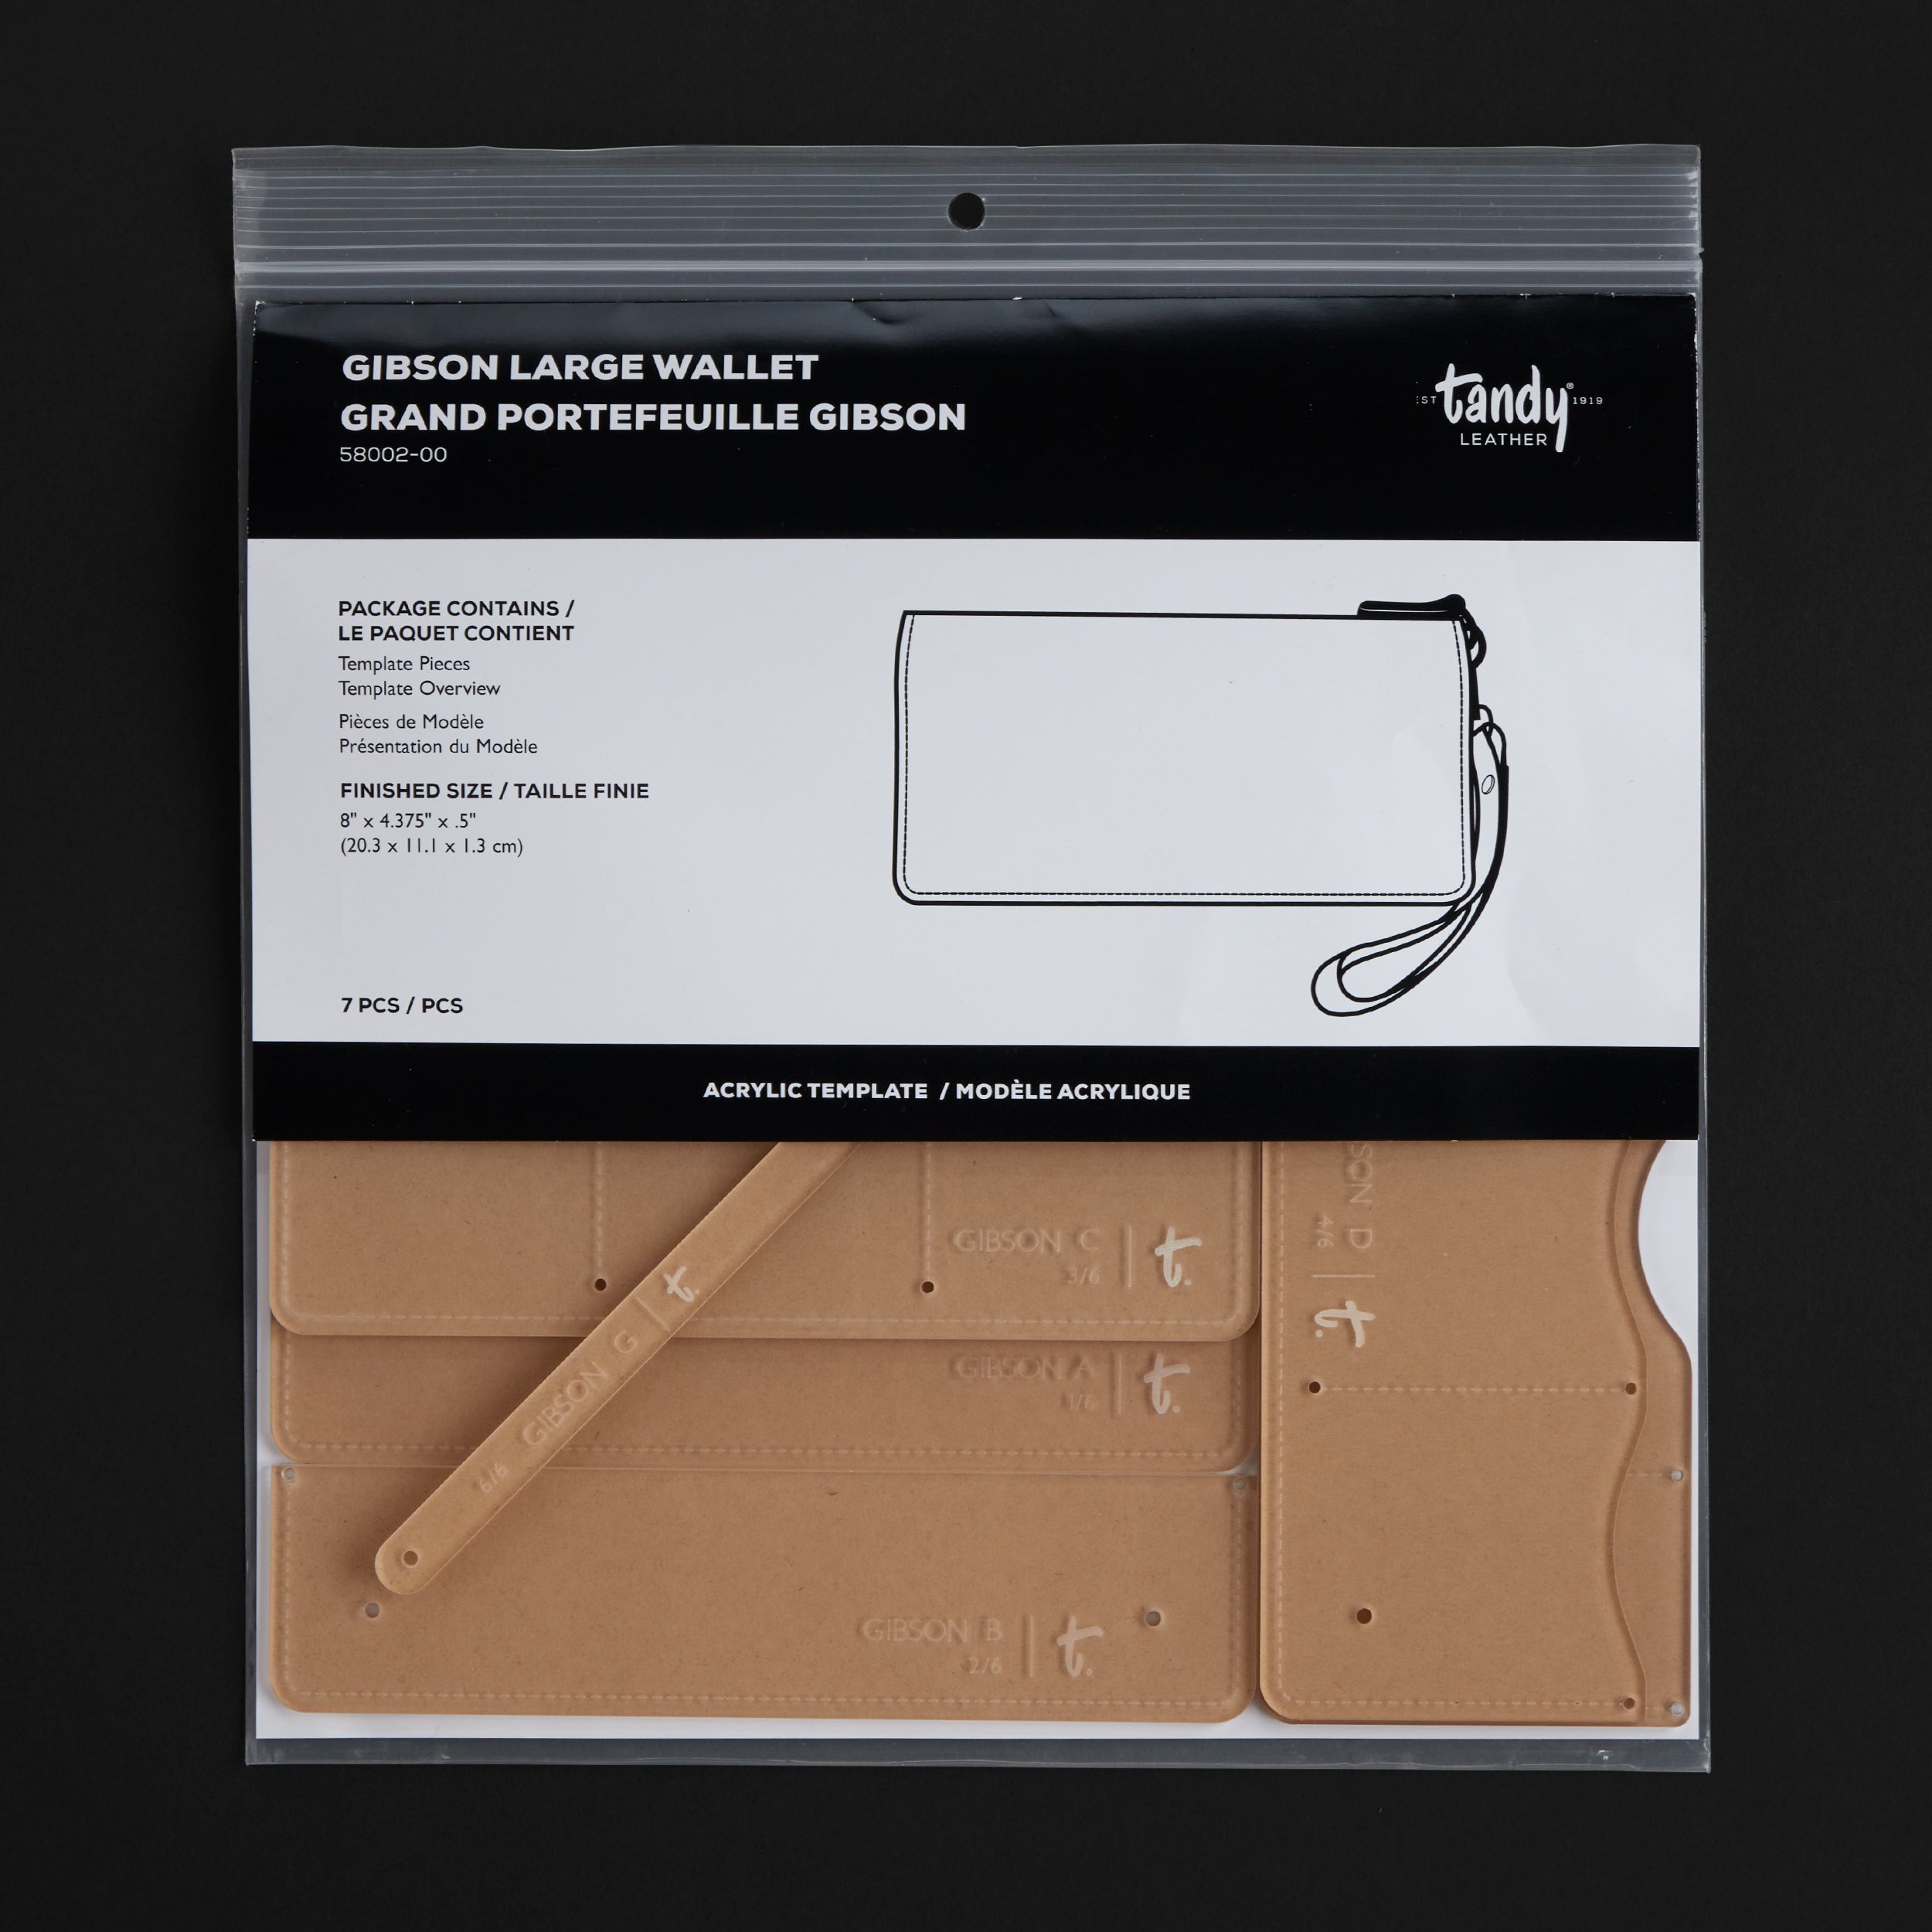 Gibson Large Wallet Acrylic Template